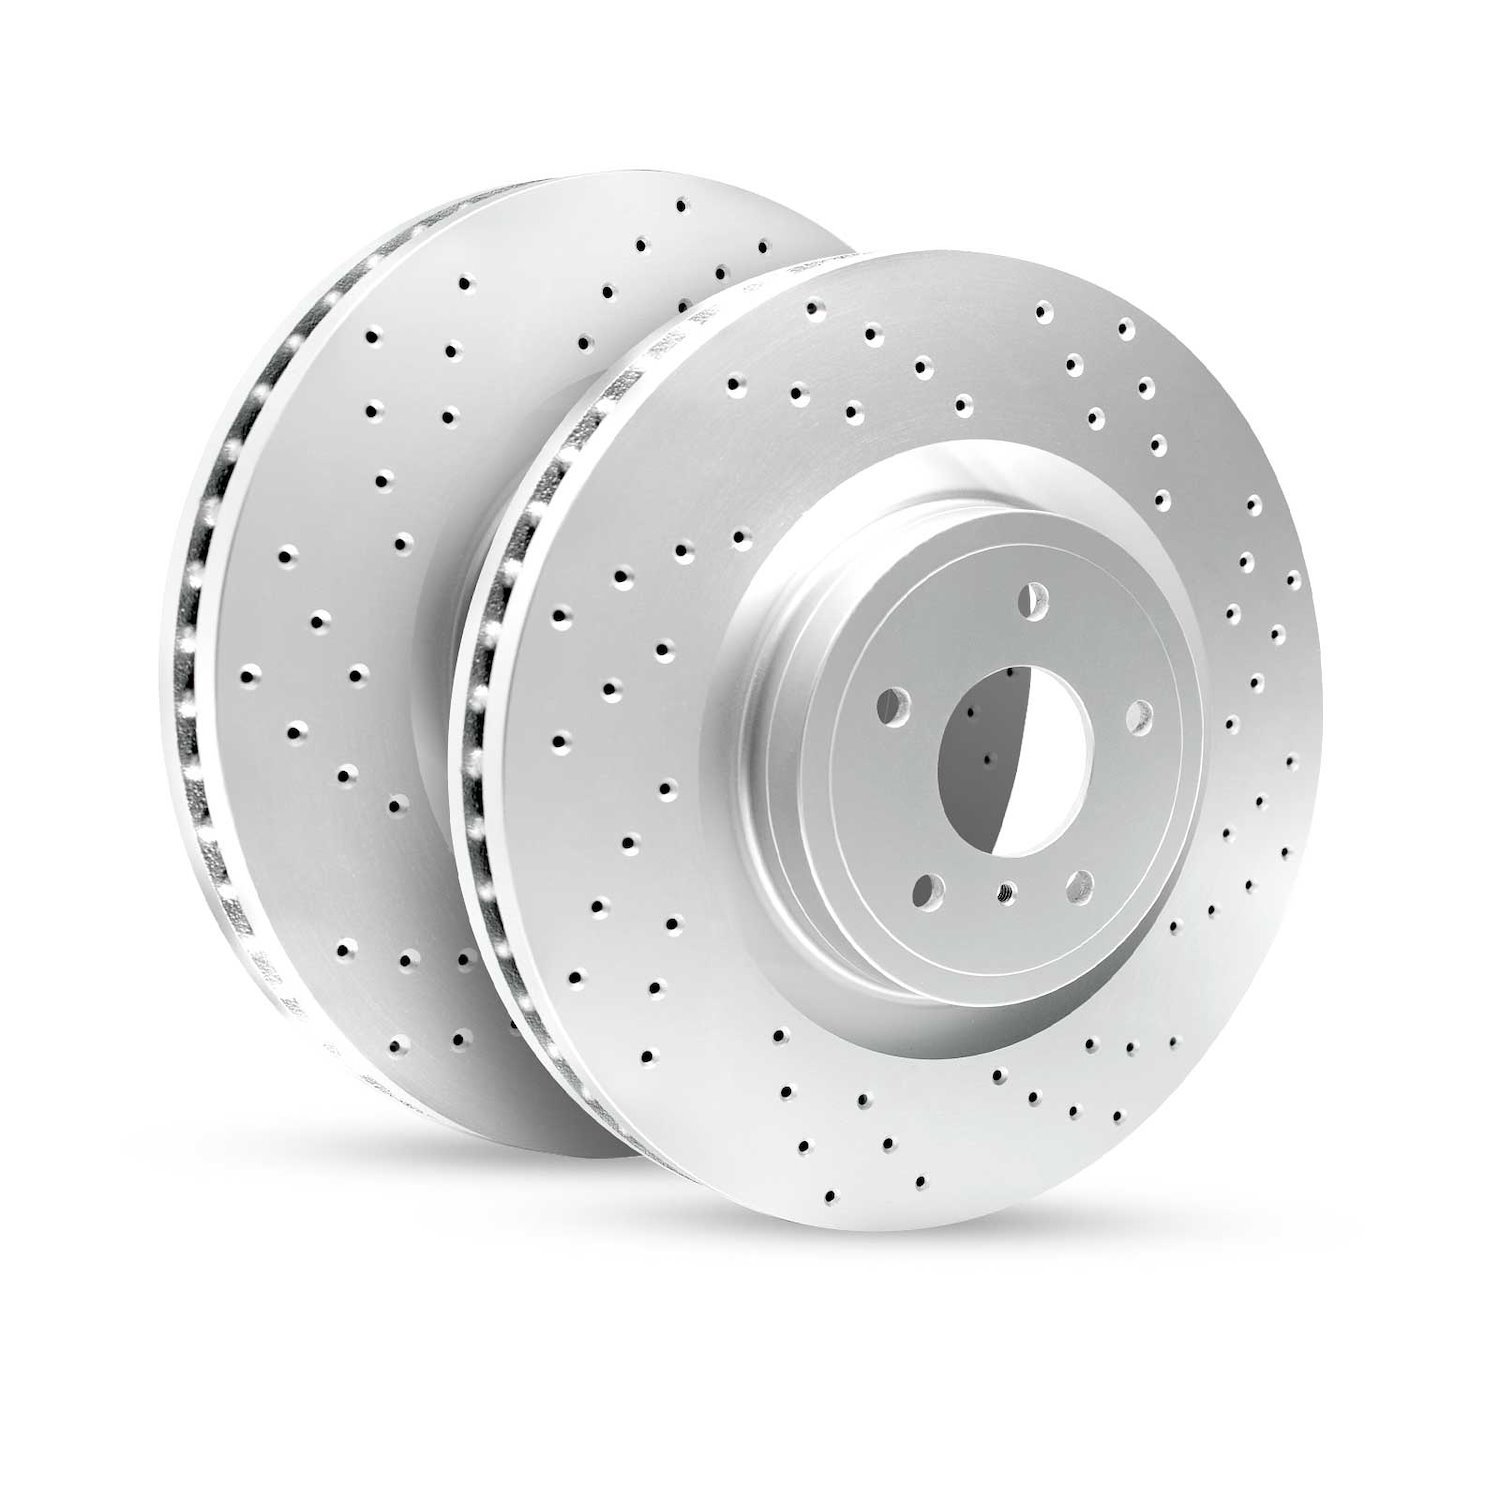 GEO-Carbon Drilled/Slotted Rotors, 2009-2014 Kia/Hyundai/Genesis, Position: Front